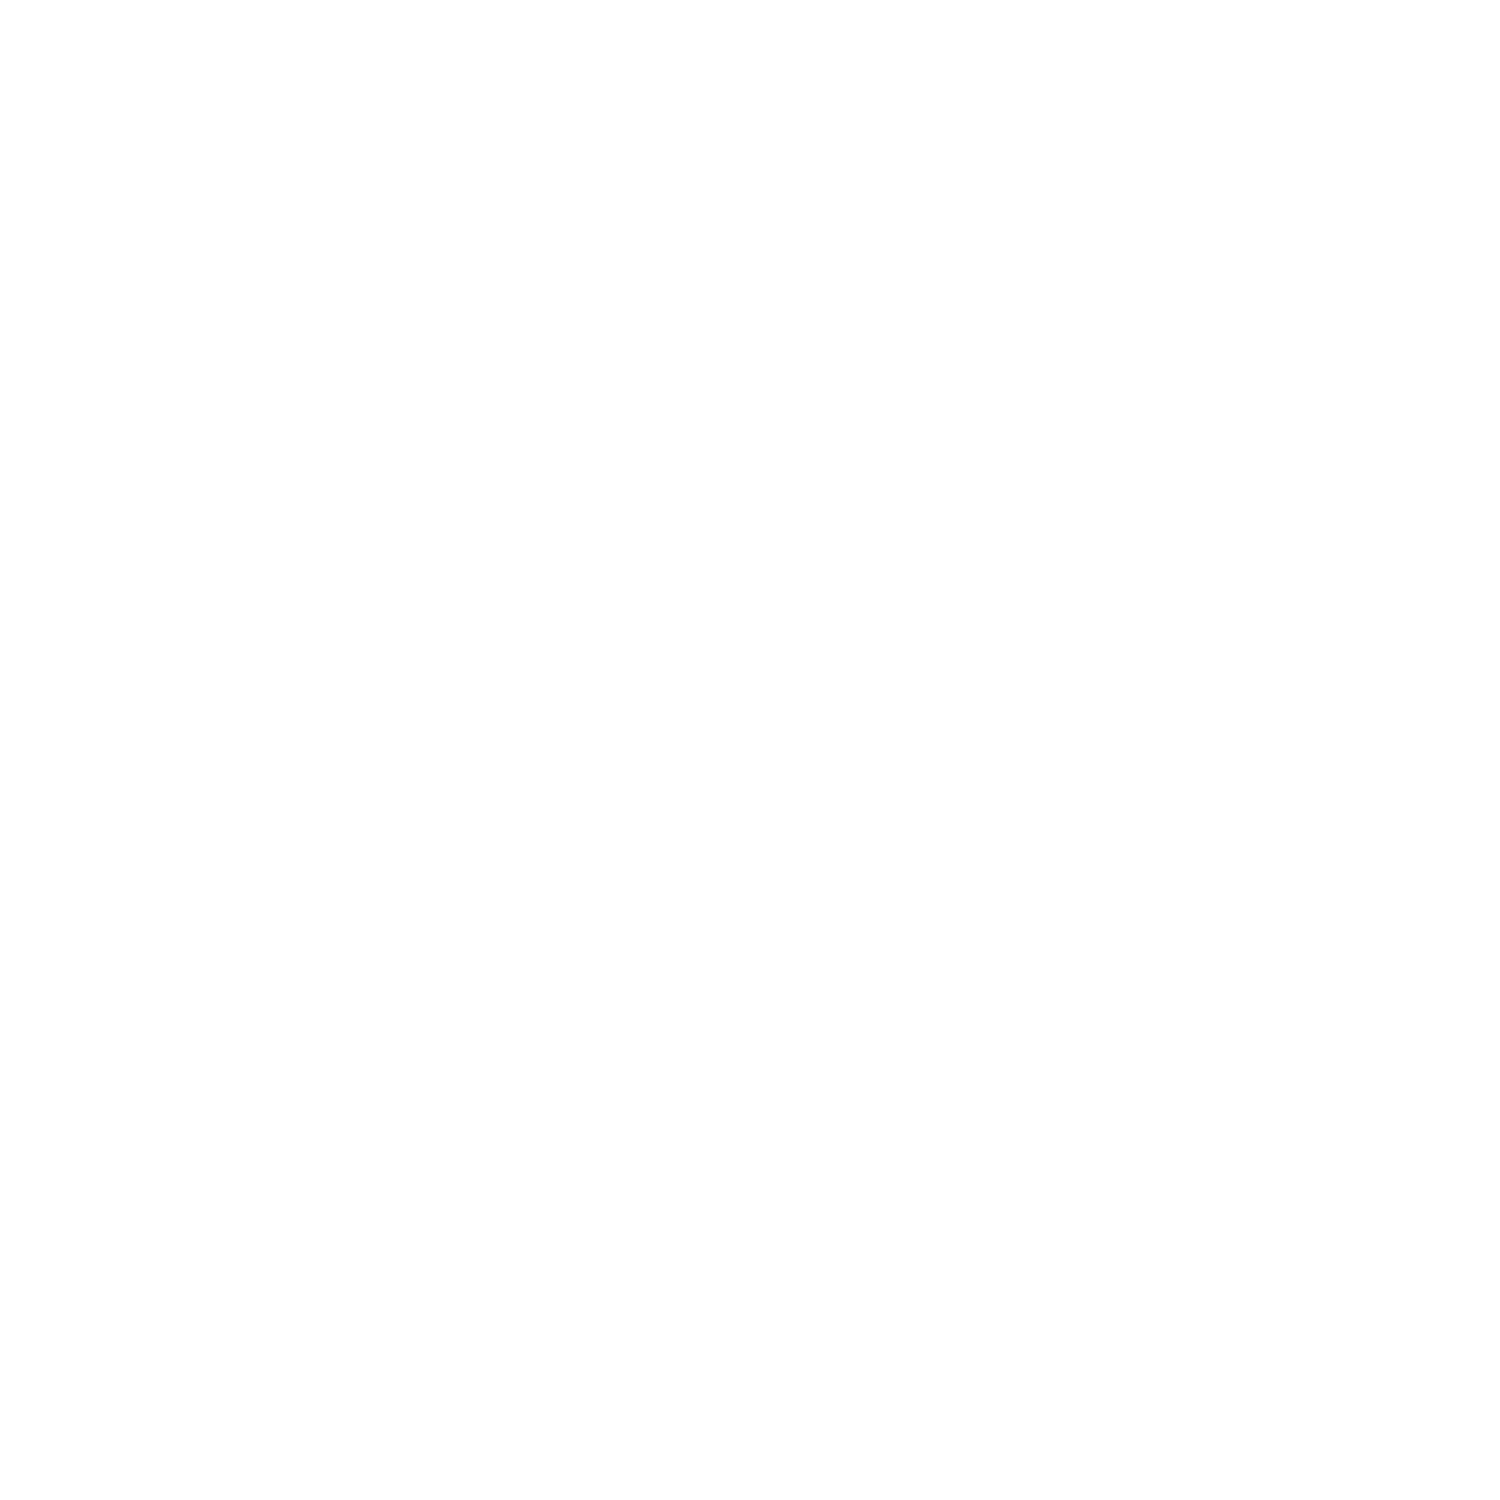 Grizzly Peak Construction